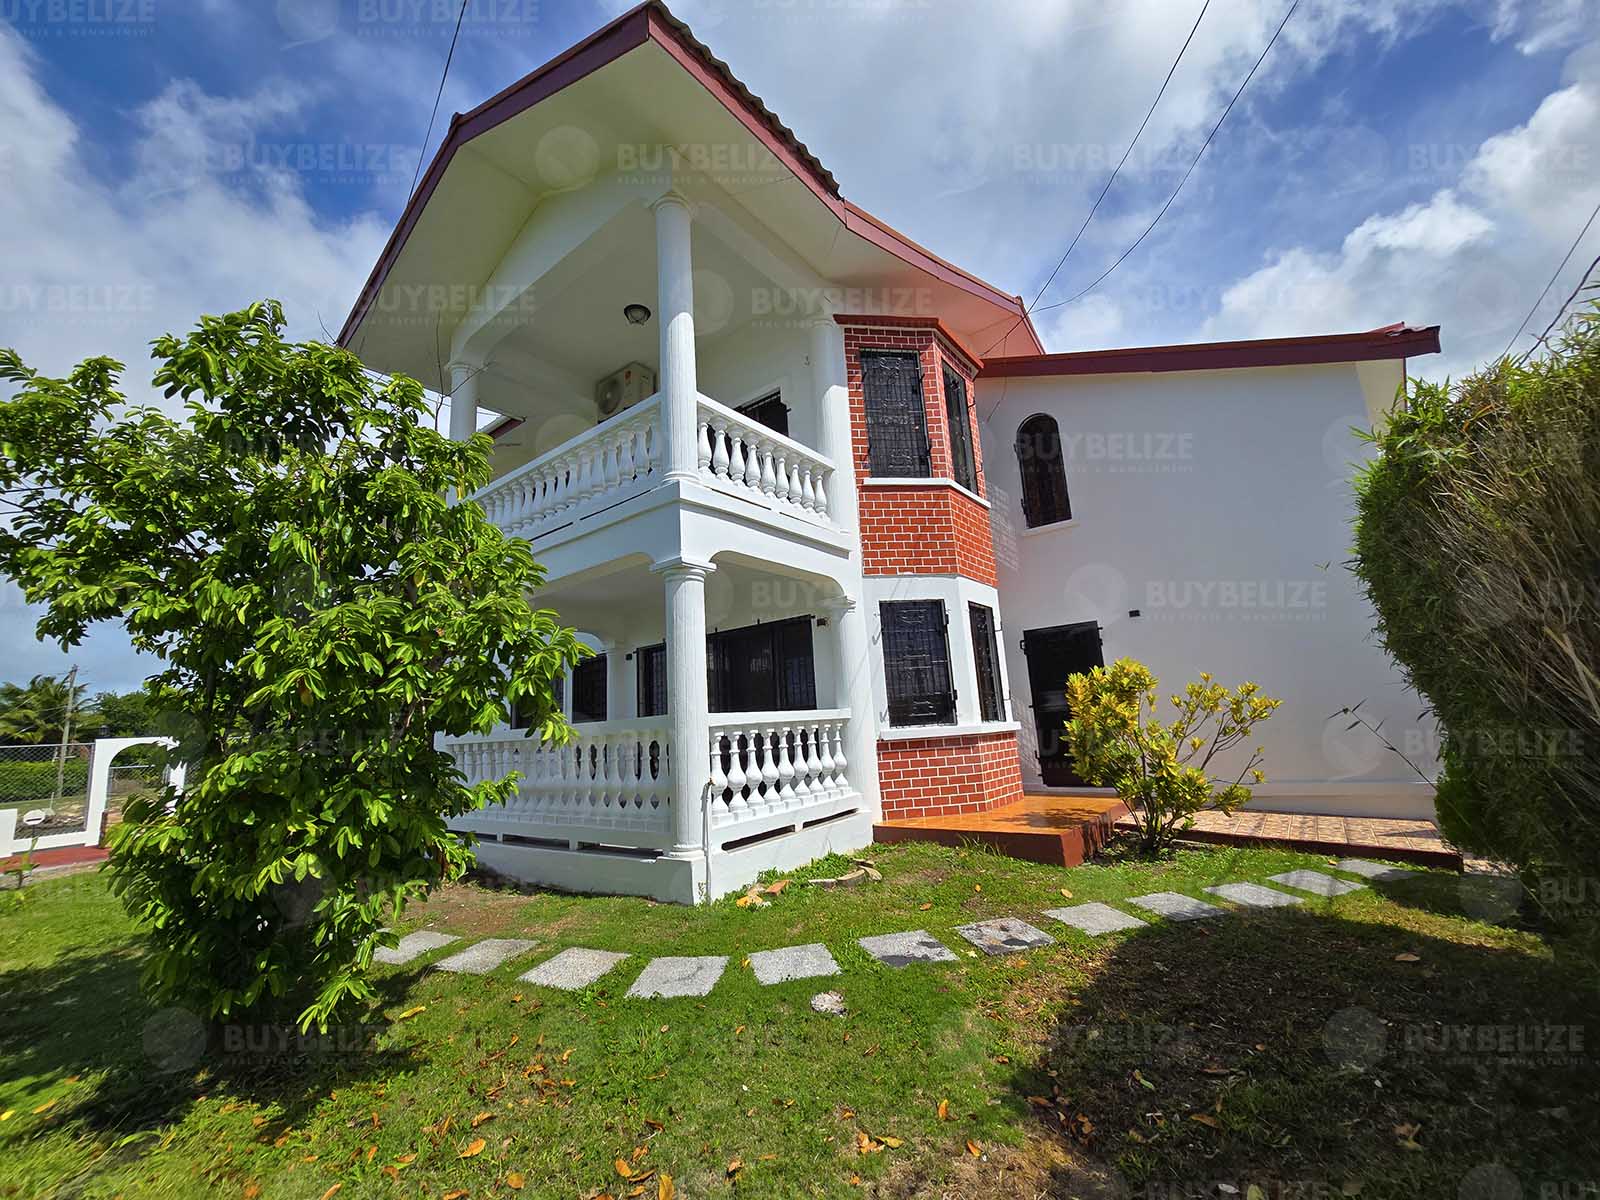 5 Bed 3.5 Bath House in Moho Bay Belize City for Rent